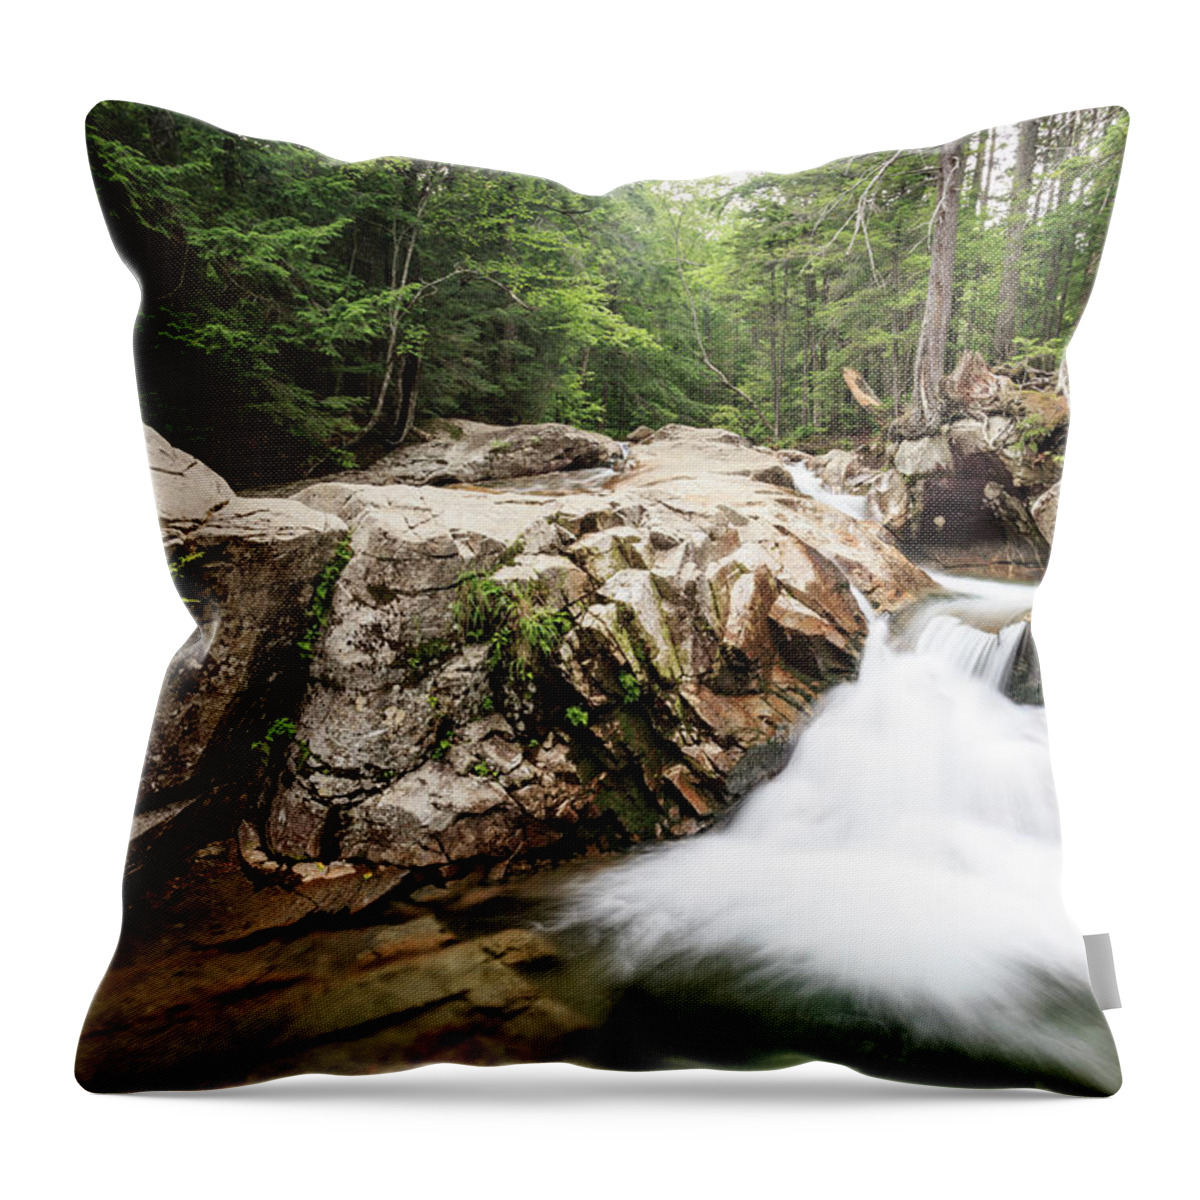 New England Throw Pillow featuring the photograph New England Waterfall by Kyle Lee